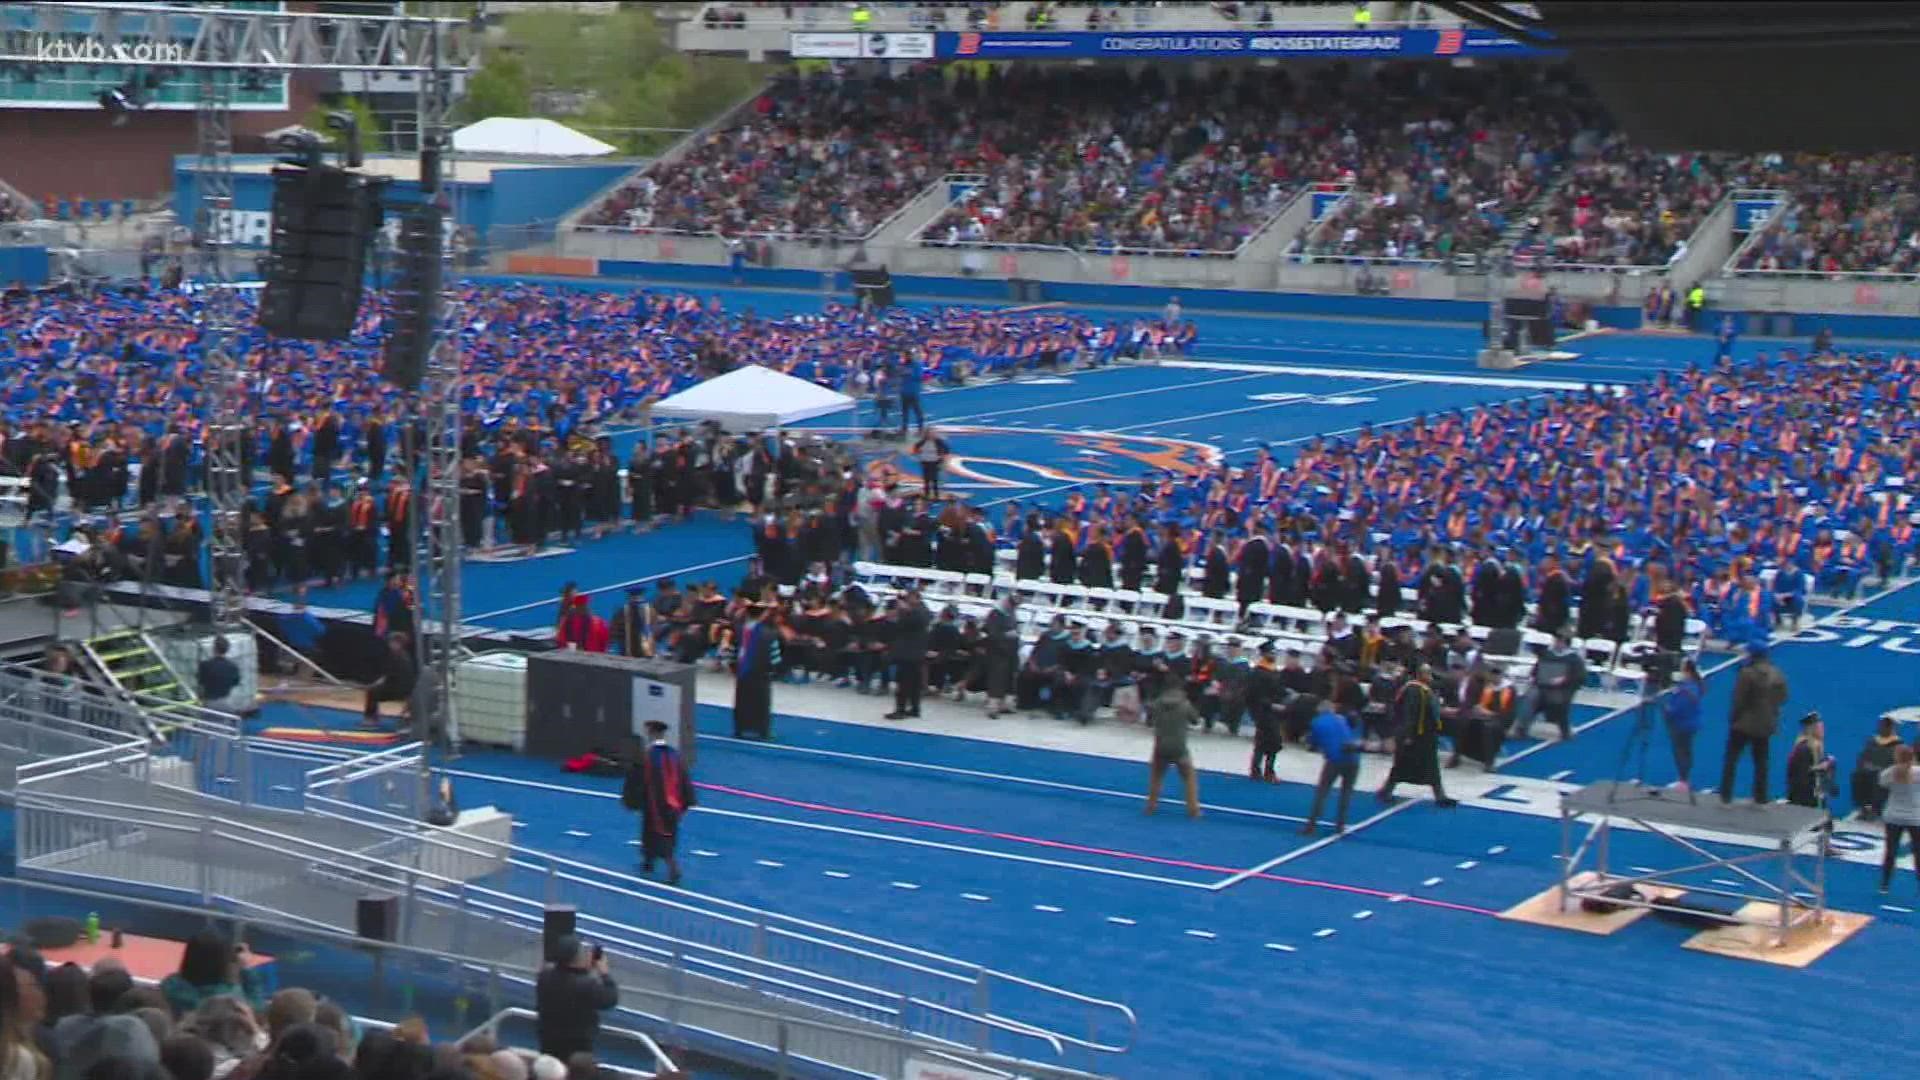 The ceremony honored 3,109 Boise State undergraduate, graduate and doctoral students who earned their degrees; the largest graduating class in Boise State history.